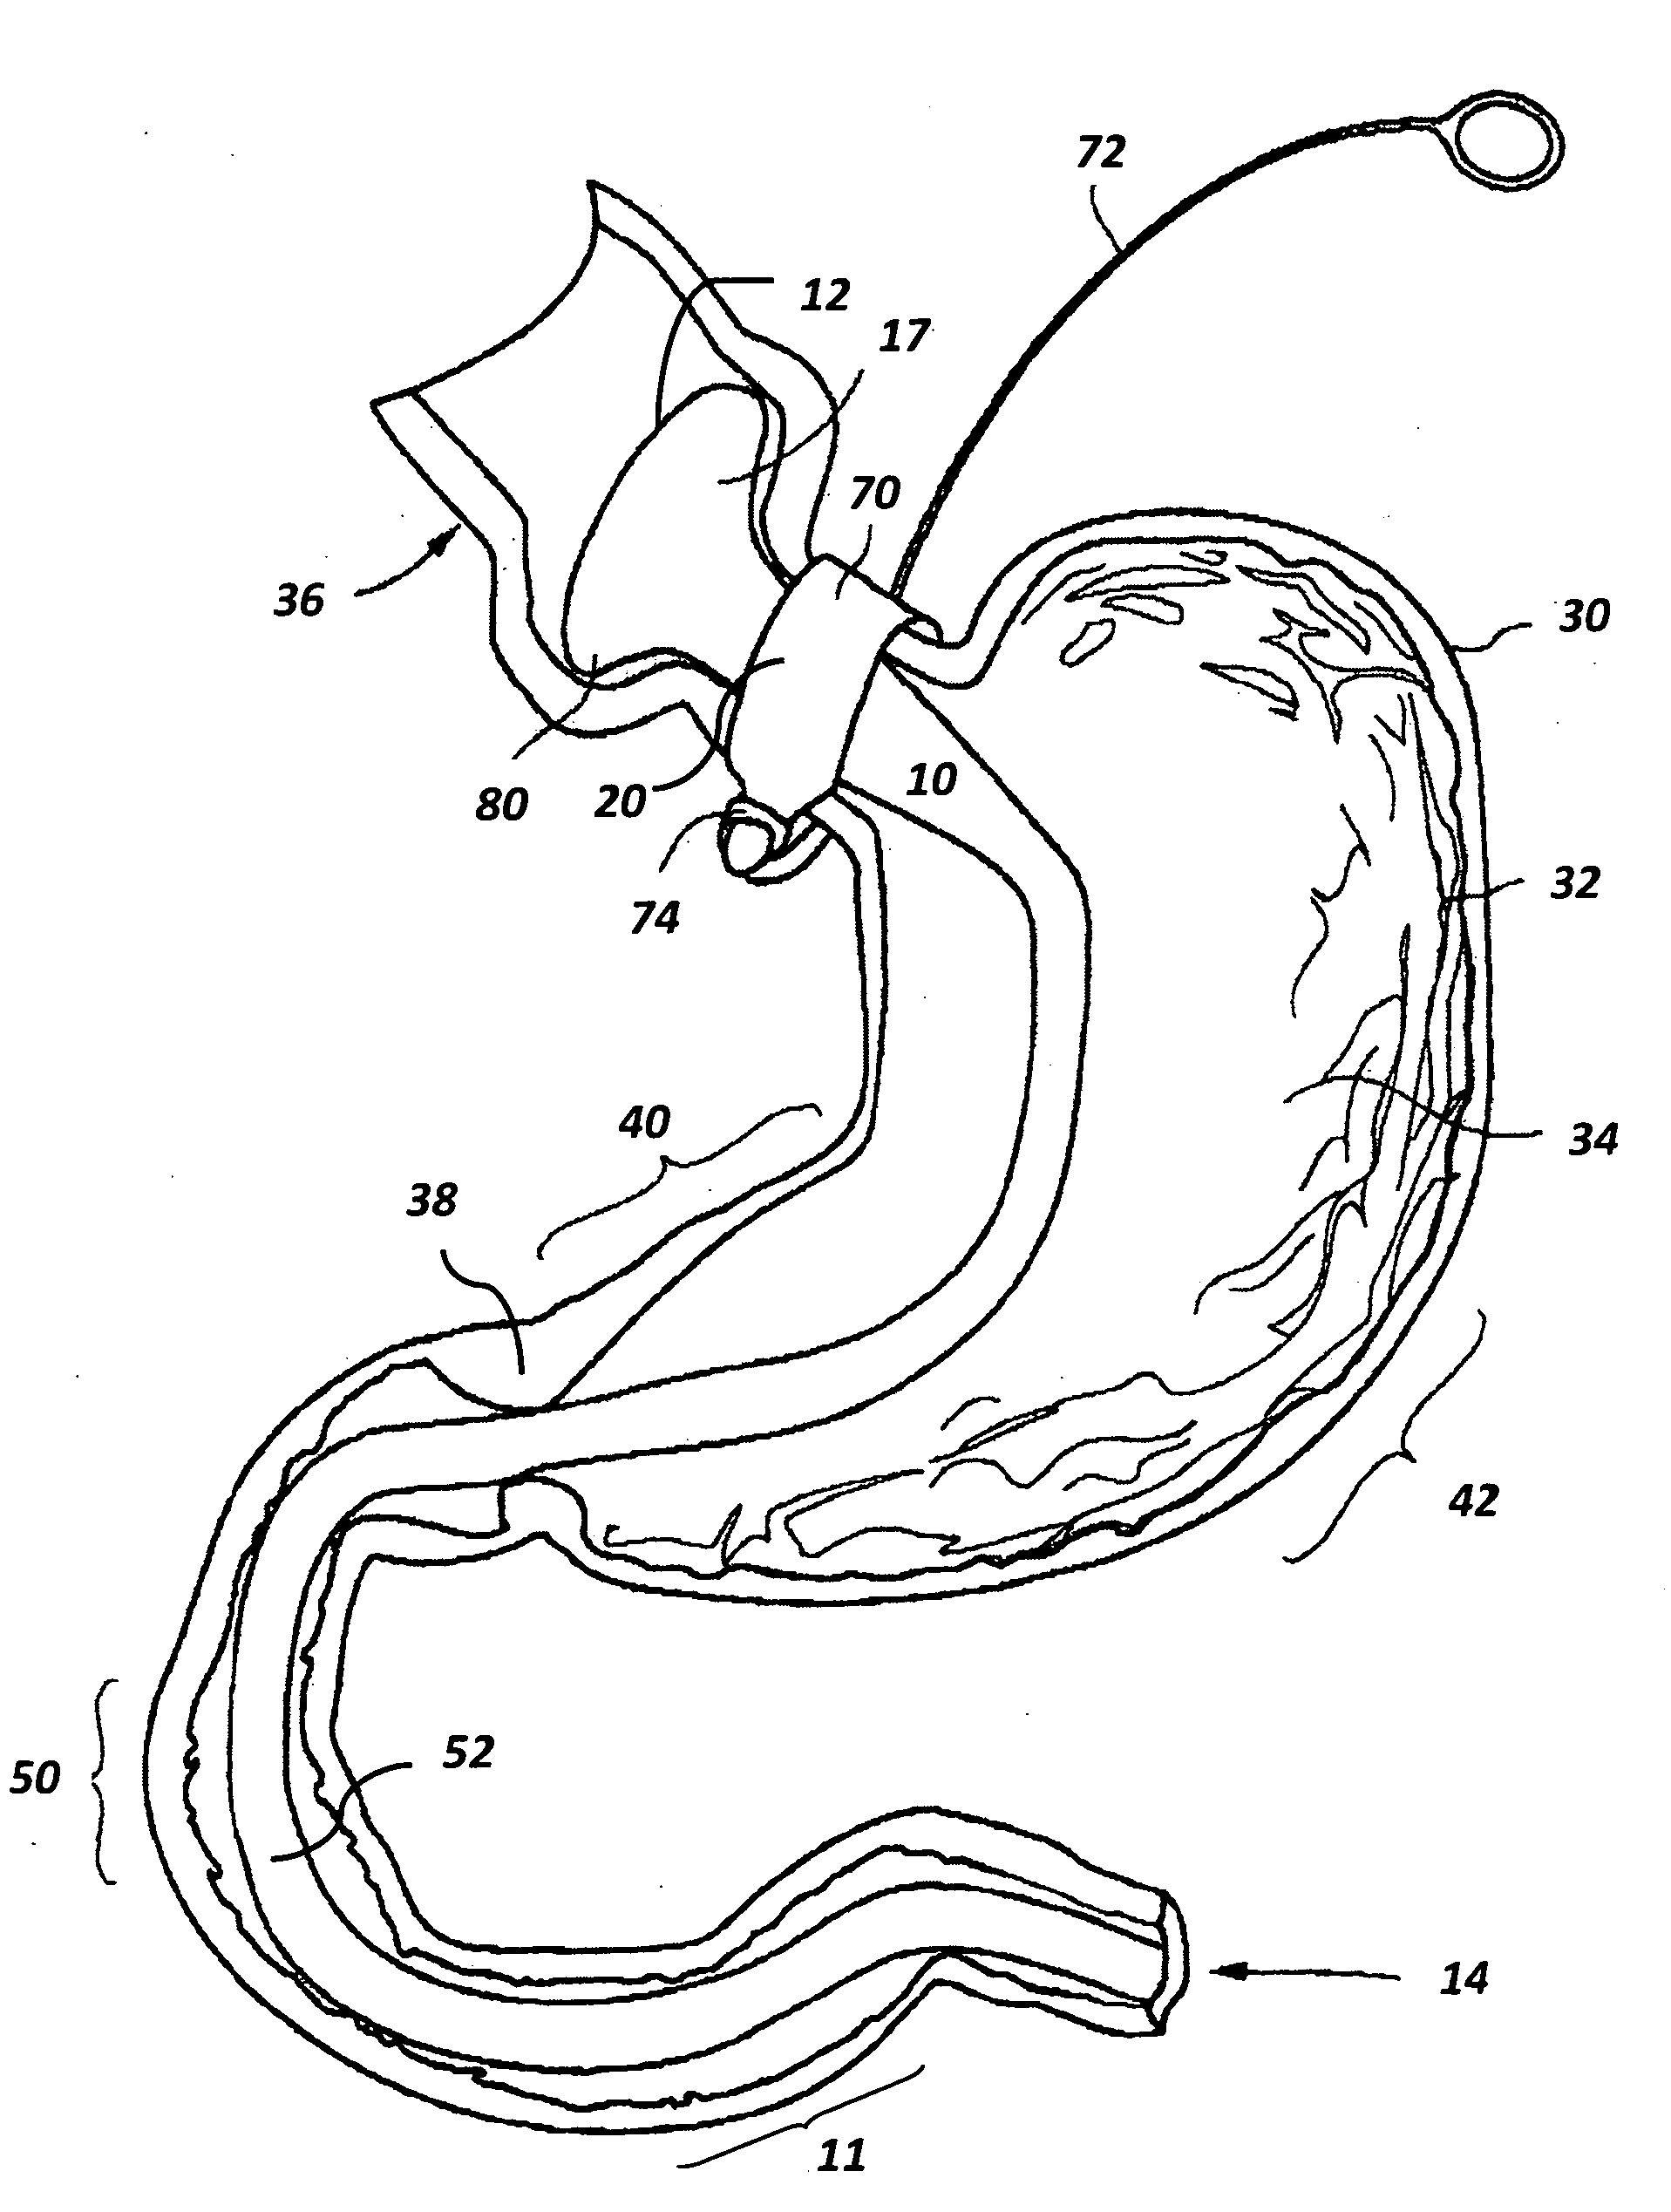 Devices and methods for augmenting extragastric banding